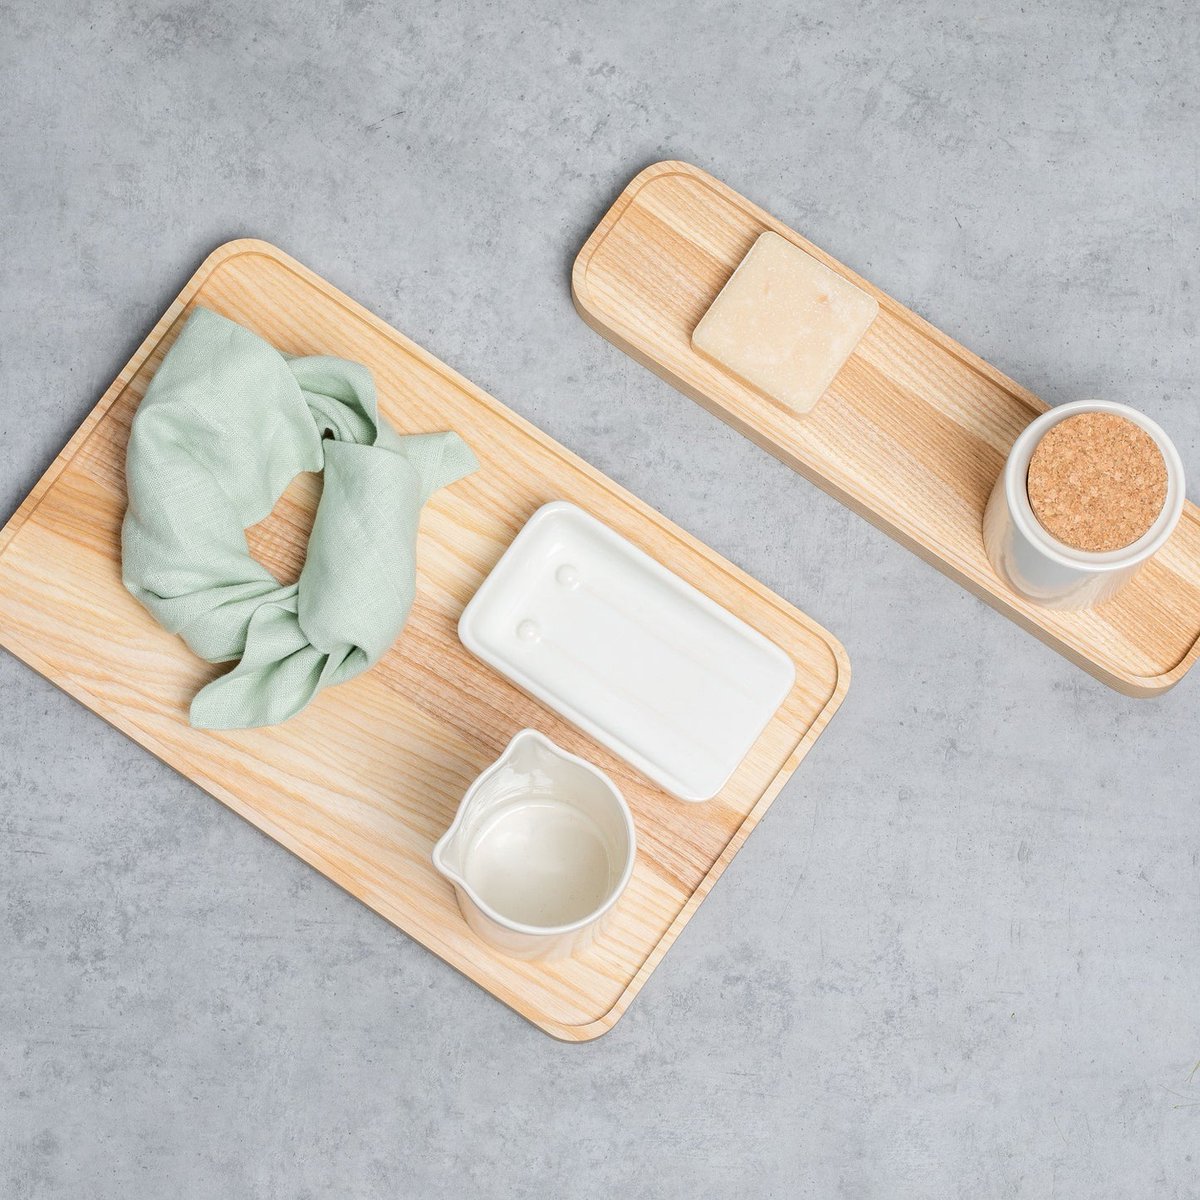 These versatile rectangle serving trays are perfect for any room in your house!

pilleveroneboutique.com/products/woode…

#ashwood #servingtray #homedecor #tray #servingboard #cheeseboard #charcuterieboard #woodworking #trays #woodentray #servingplatter #servingtrays